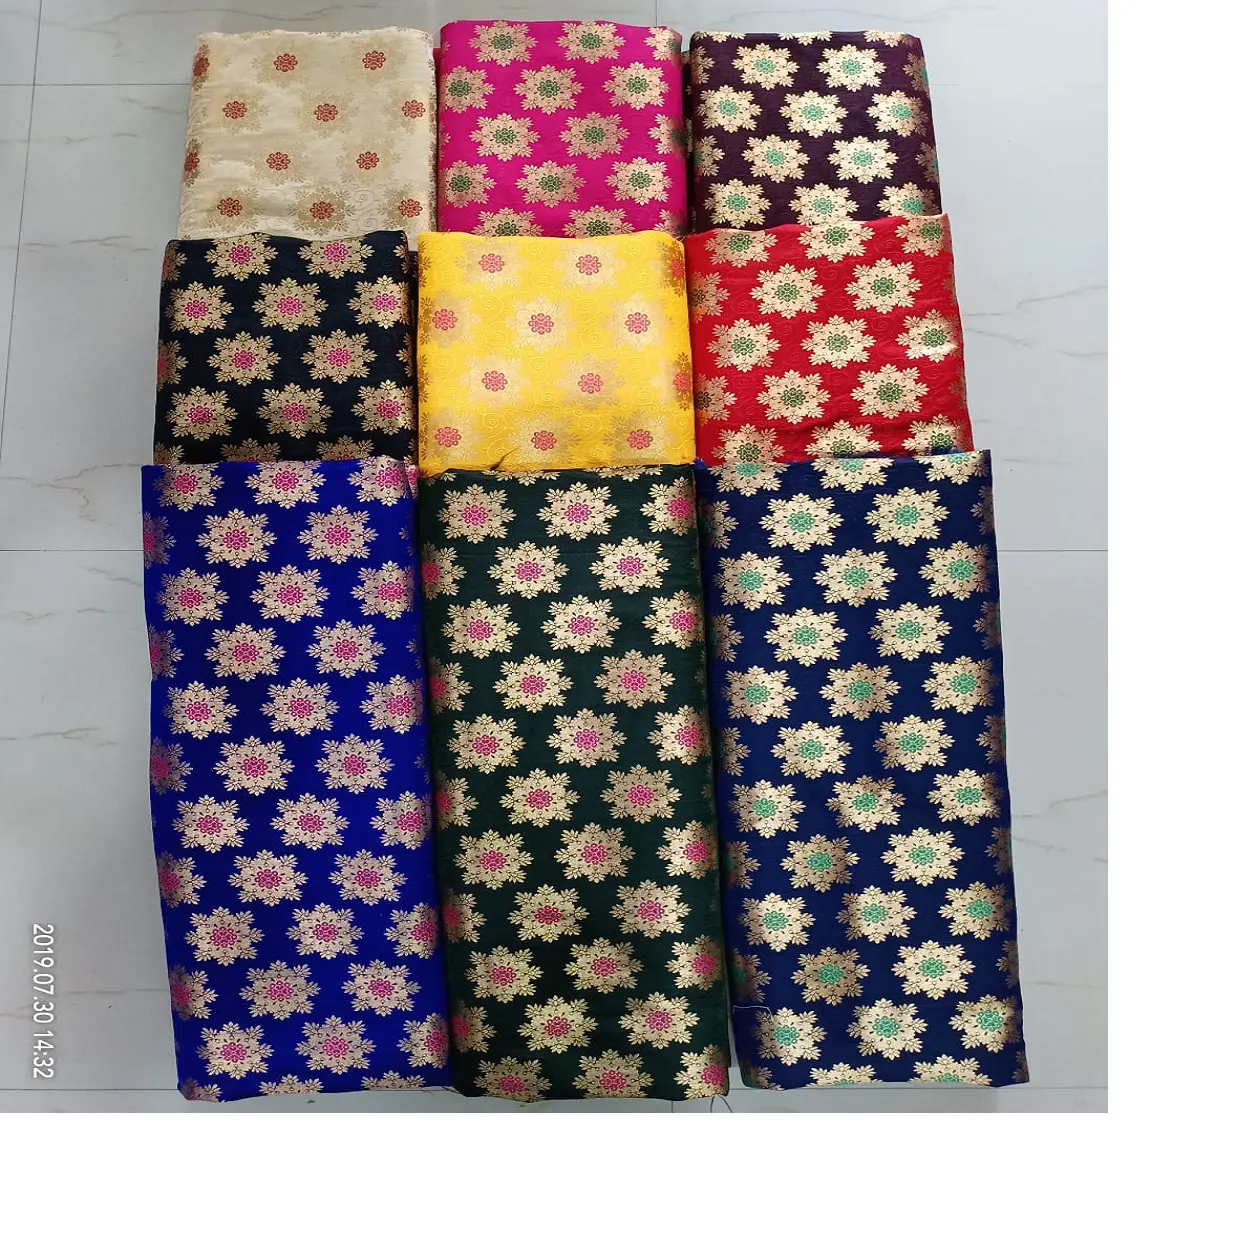 custom made brocade silk fabrics in traditional indian and south east asian designs ideal for resale in floral design